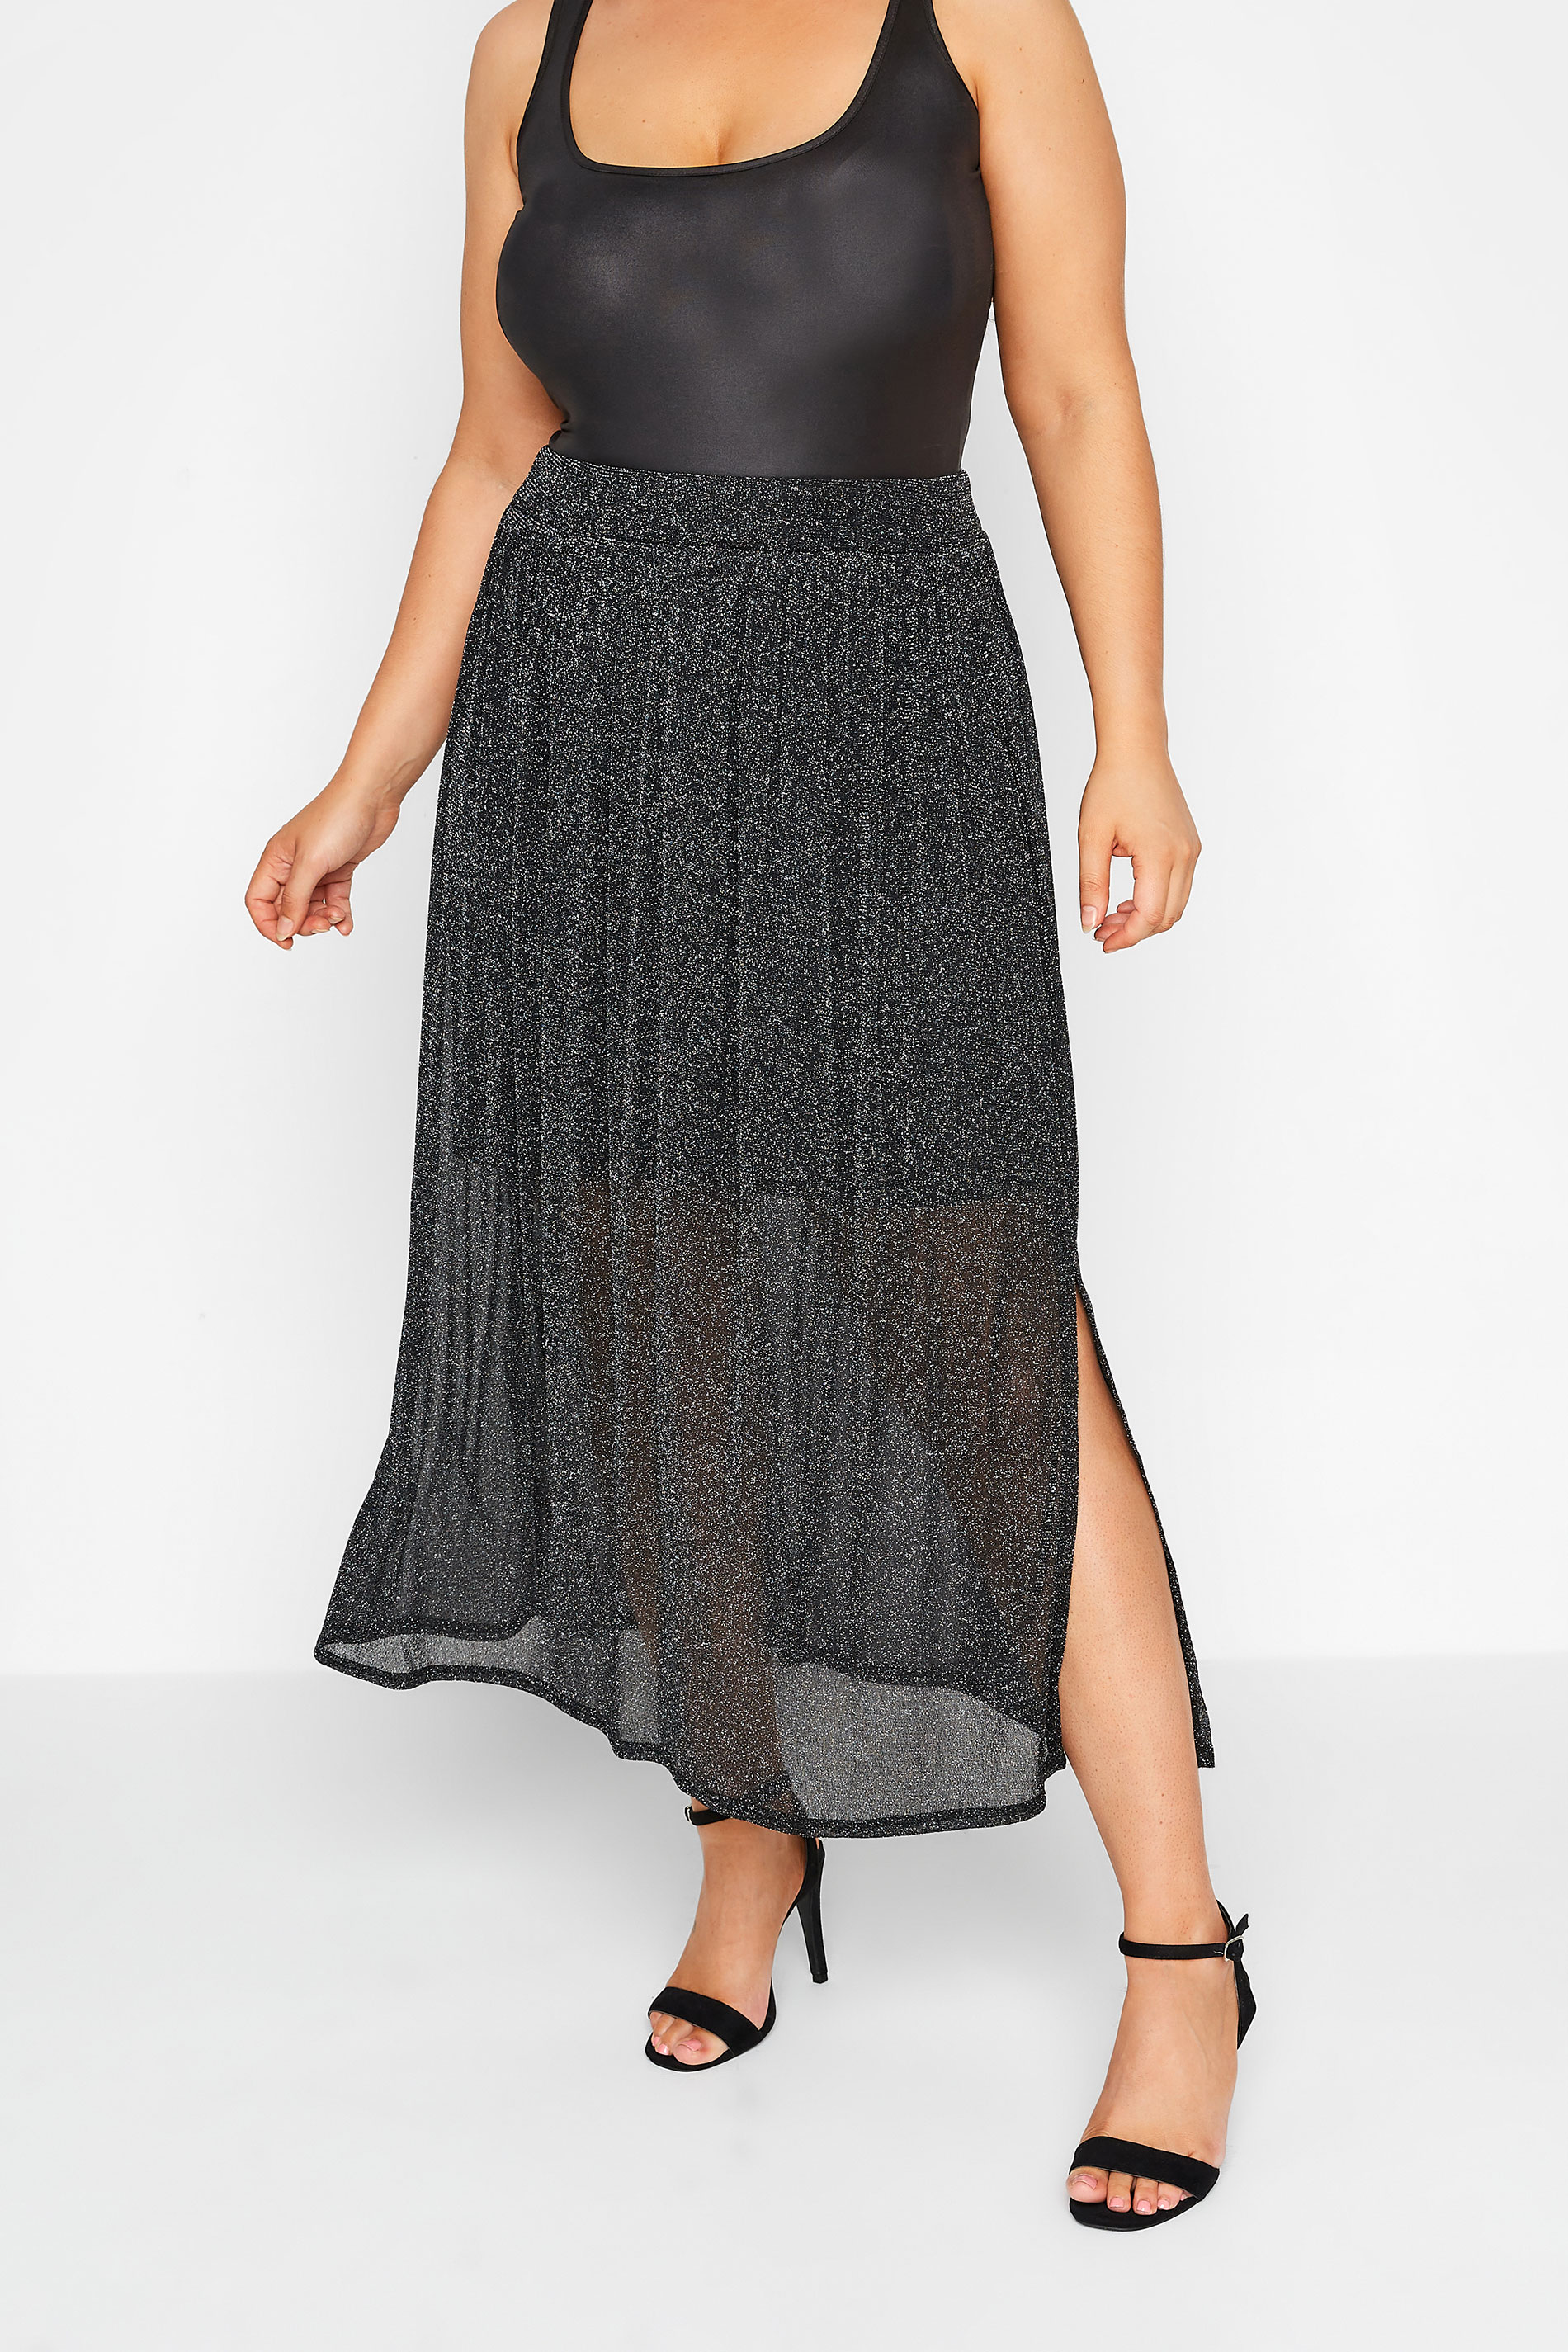 LIMITED COLLECTION Plus Size Black Glitter Midaxi Skirt | Yours Clothing 1